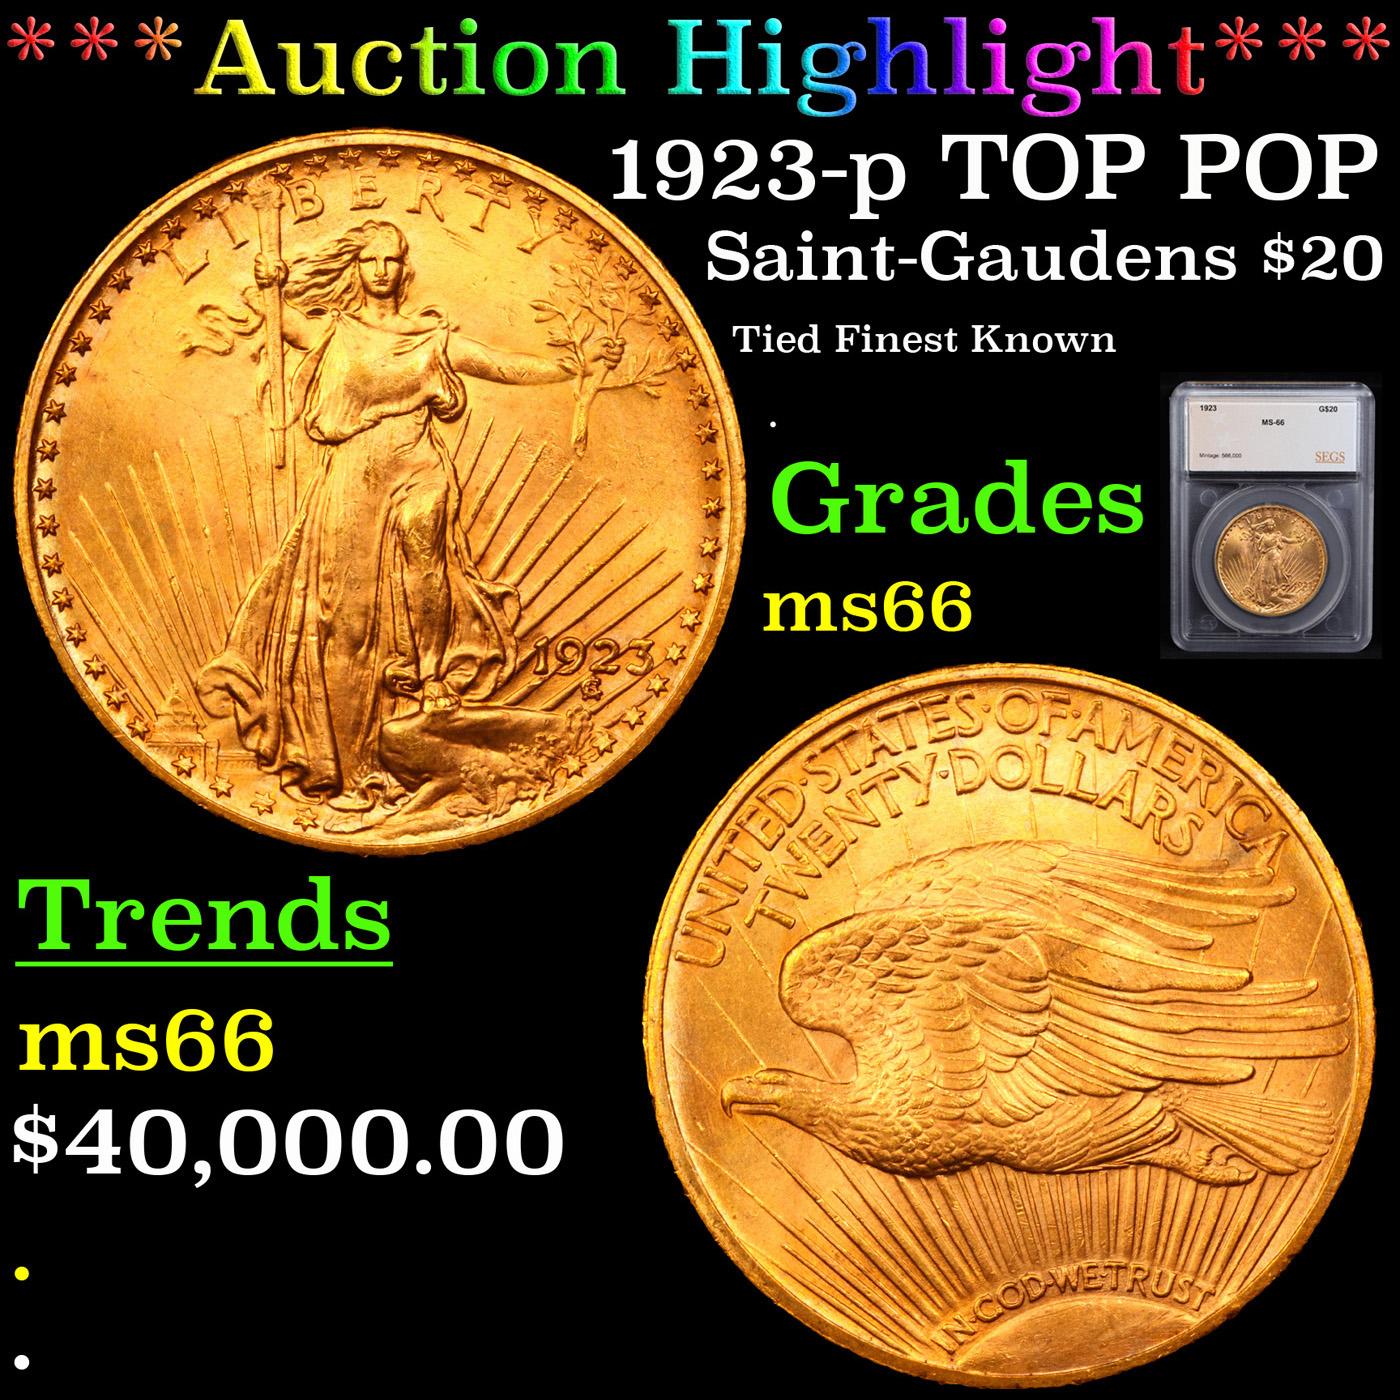 ***Auction Highlight*** 1923-p TOP POP Saint-Gaudens $20 Gold Double Eagle Graded ms66 By SEGS (fc)